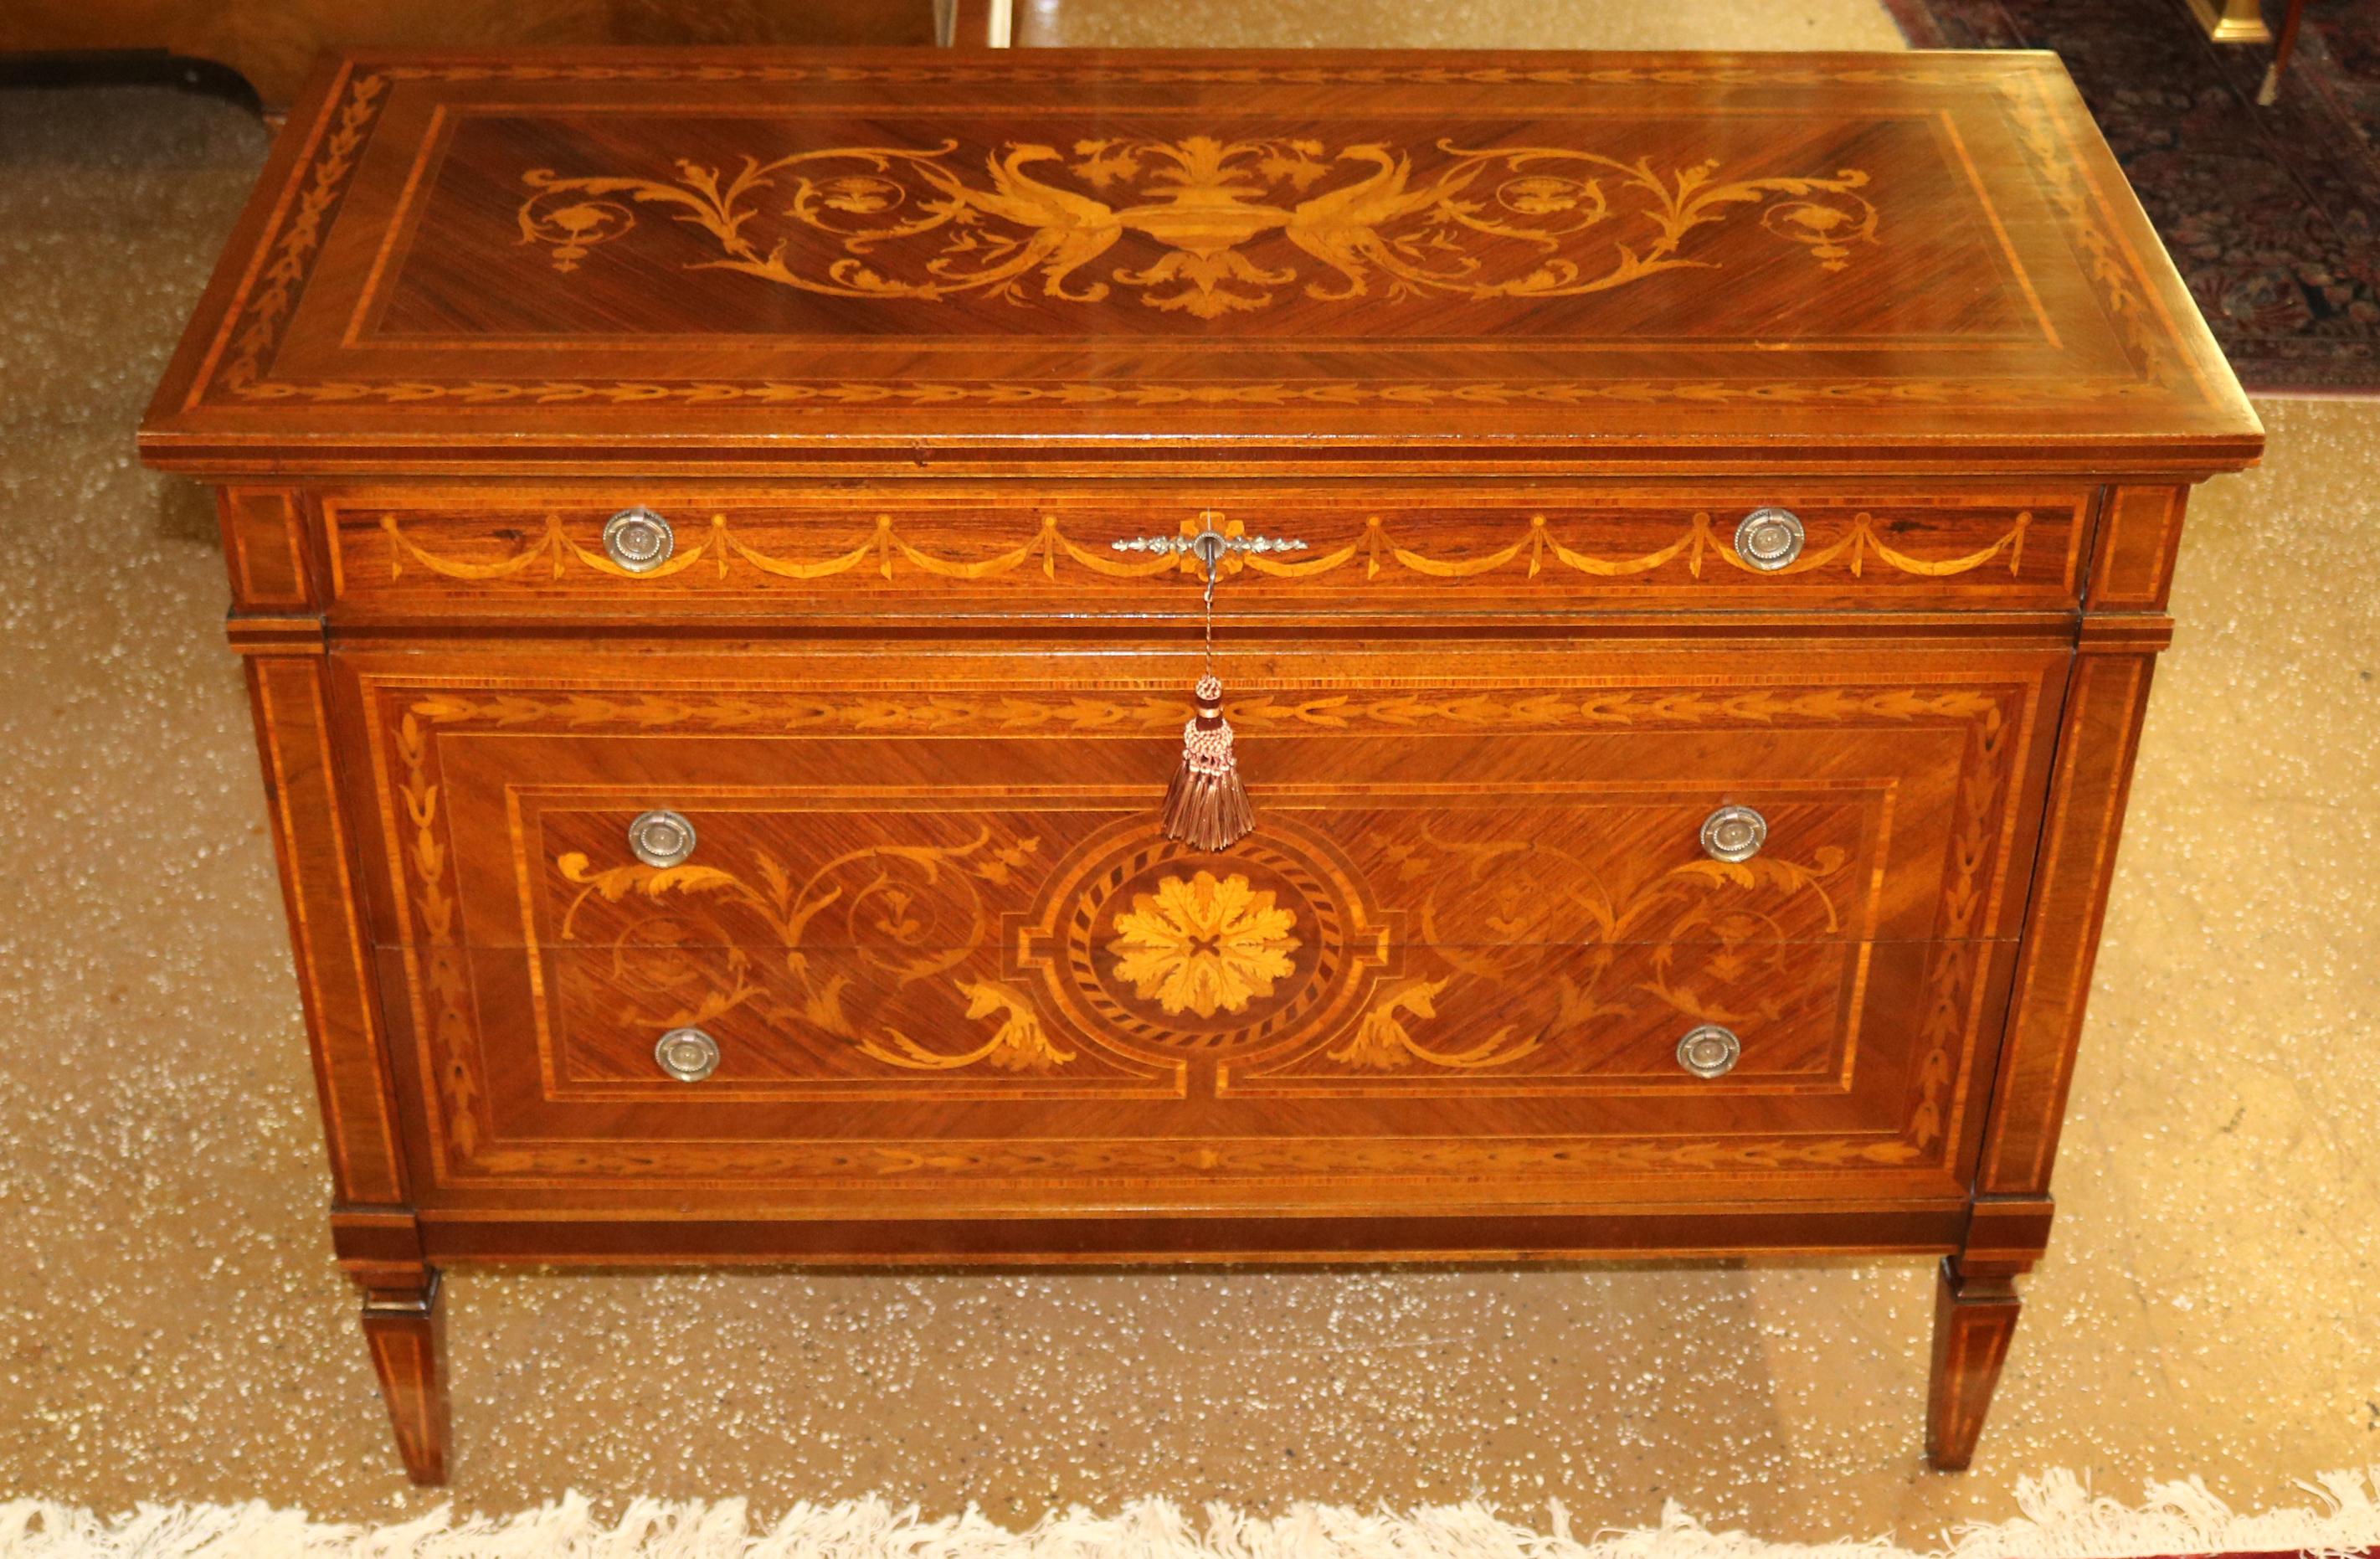 Neoclassical Italian Inlaid Rosewood Commode Dresser Chest of Drawers For Sale